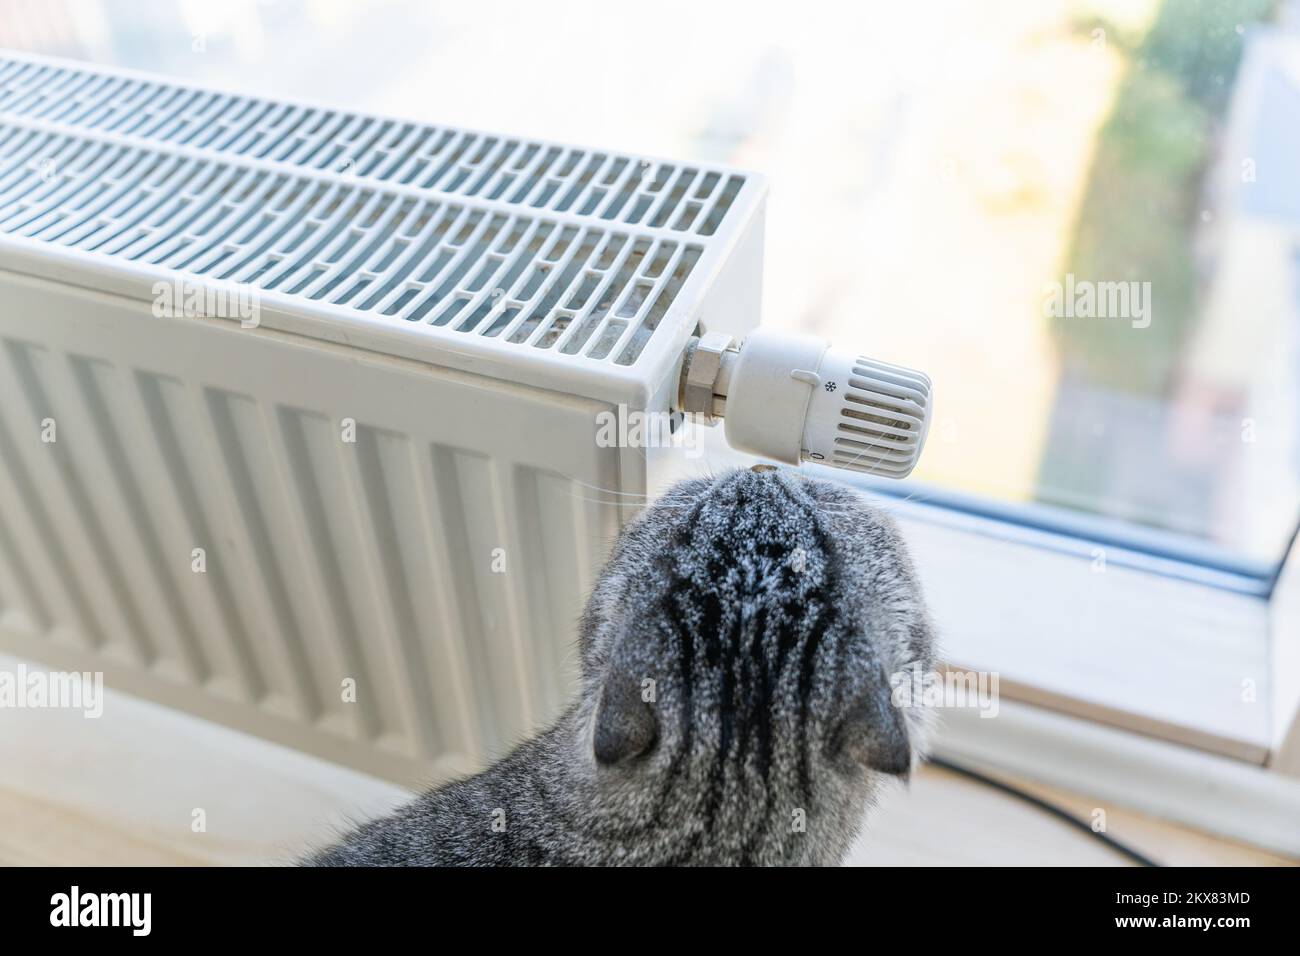 A striped cat touches his nose to the body adjustment knob of the heating radiator near the window Stock Photo